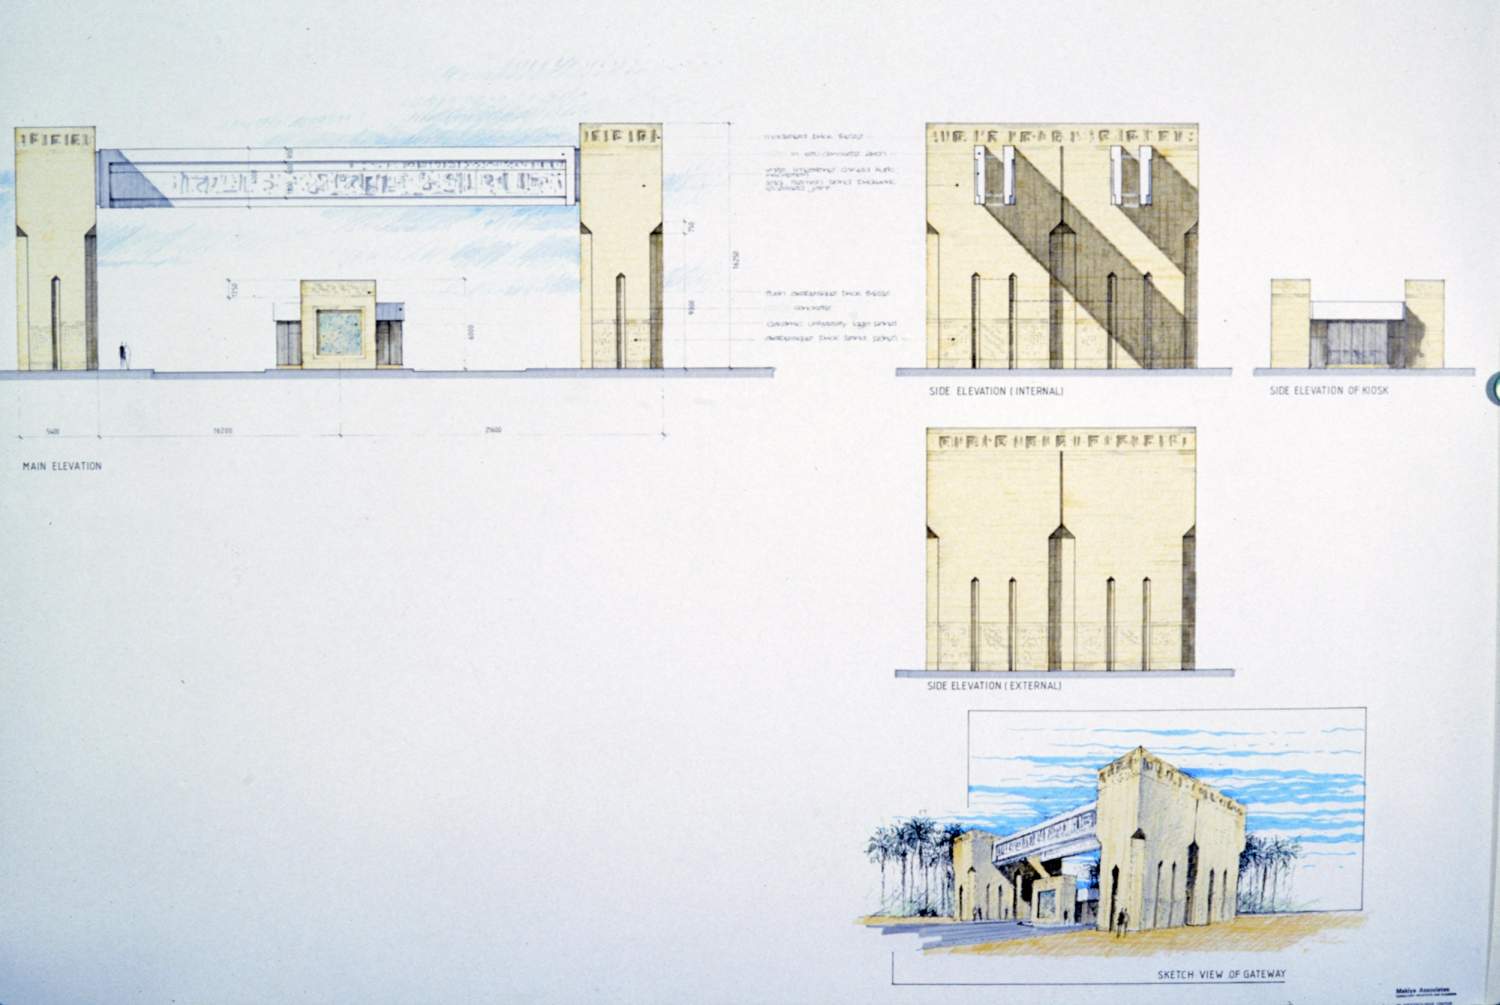 Gateway to the university: elevations and perspective view.